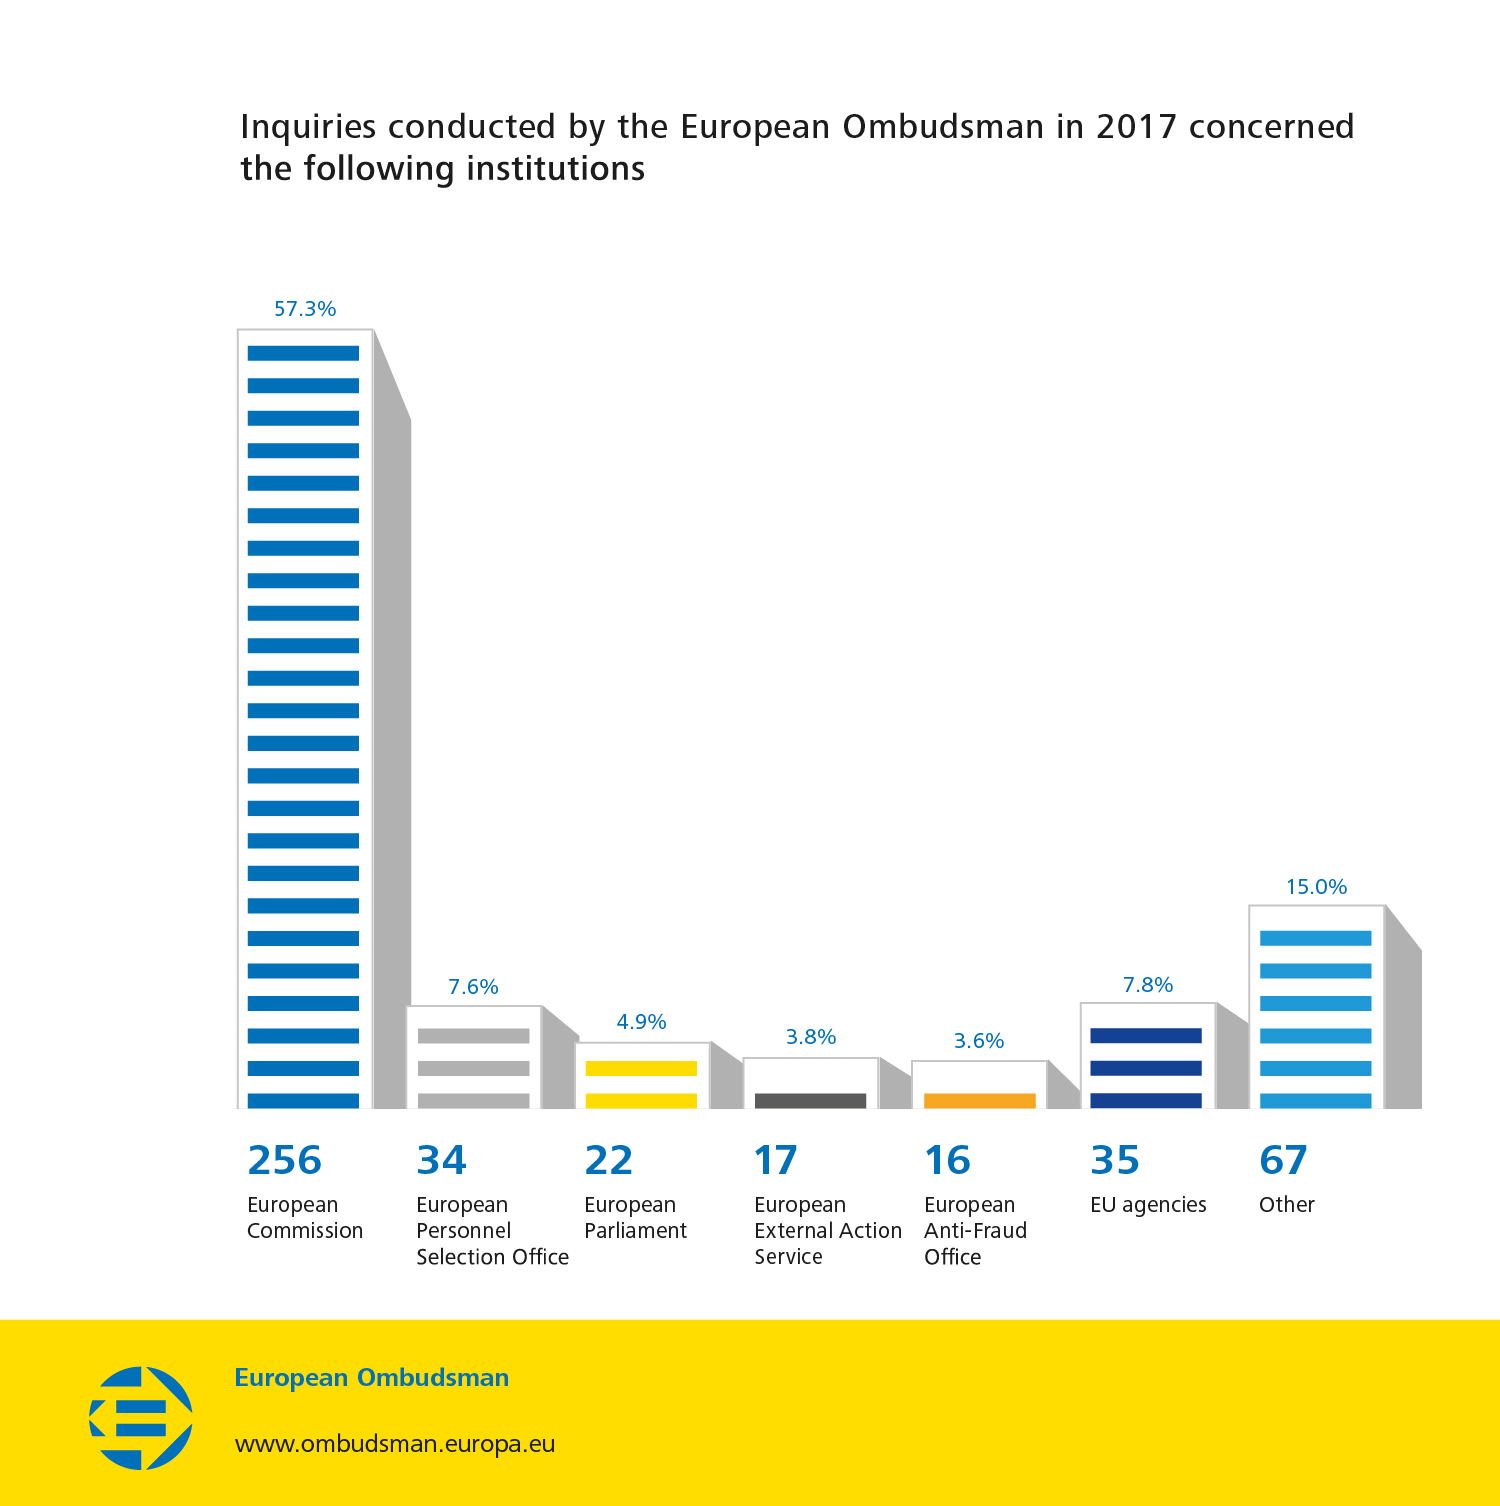 Inquiries conducted by the European Ombudsman in 2017 concerned the following institutions